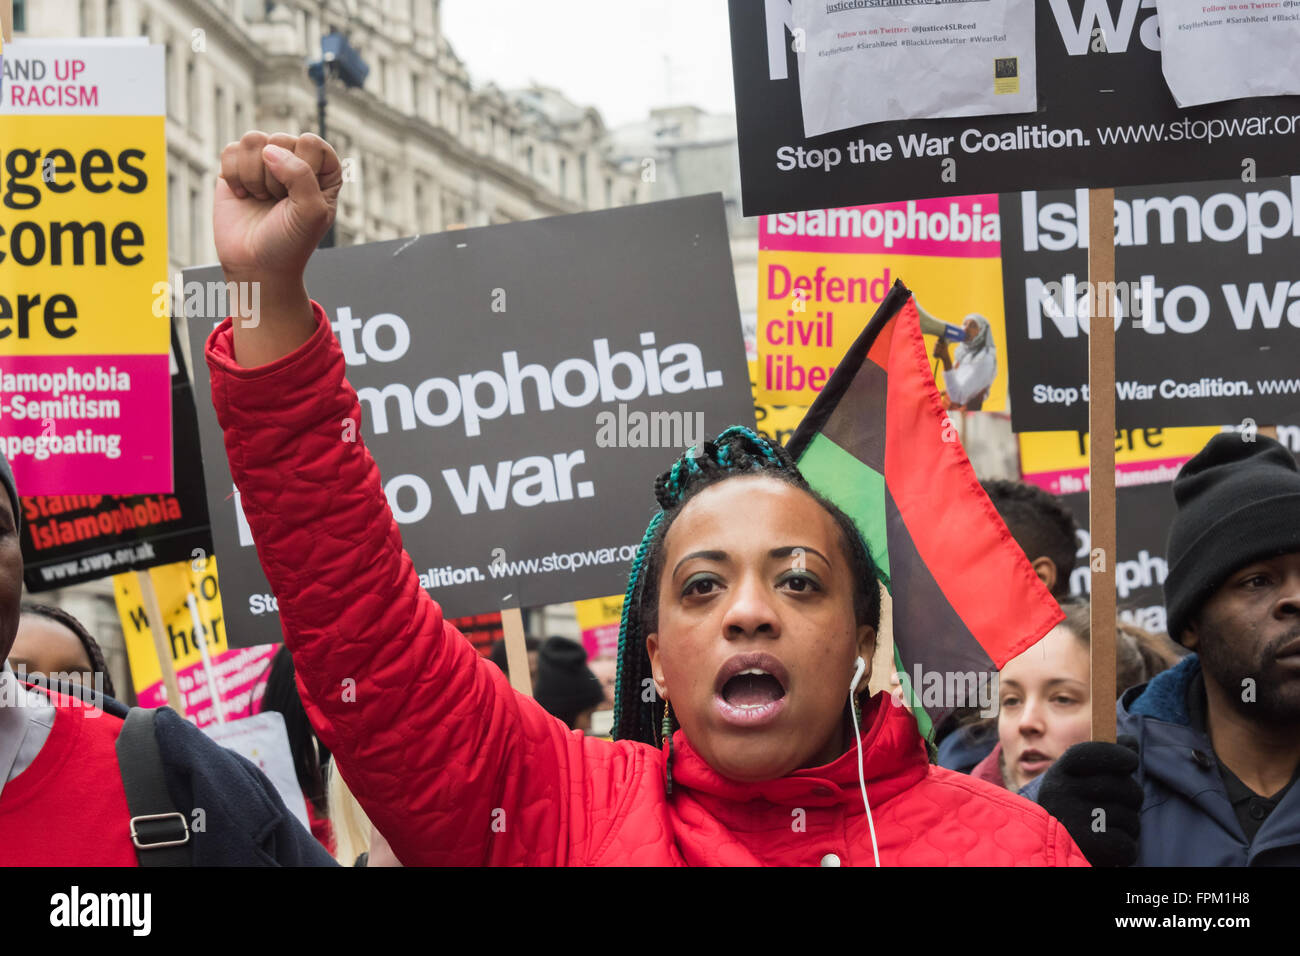 London, UK. Saturday 19th March 2016. A woman in the 'Black Lives Matter' bloc gives a raised fist salute n the march through London from the BBC in a national demonstration organised by Stand Up to Racism against racism, Islamophobia, anti-Semitism and fascism and to say clearly that refugees are welcome here.  Peter Marshall/Alamy Live News Stock Photo